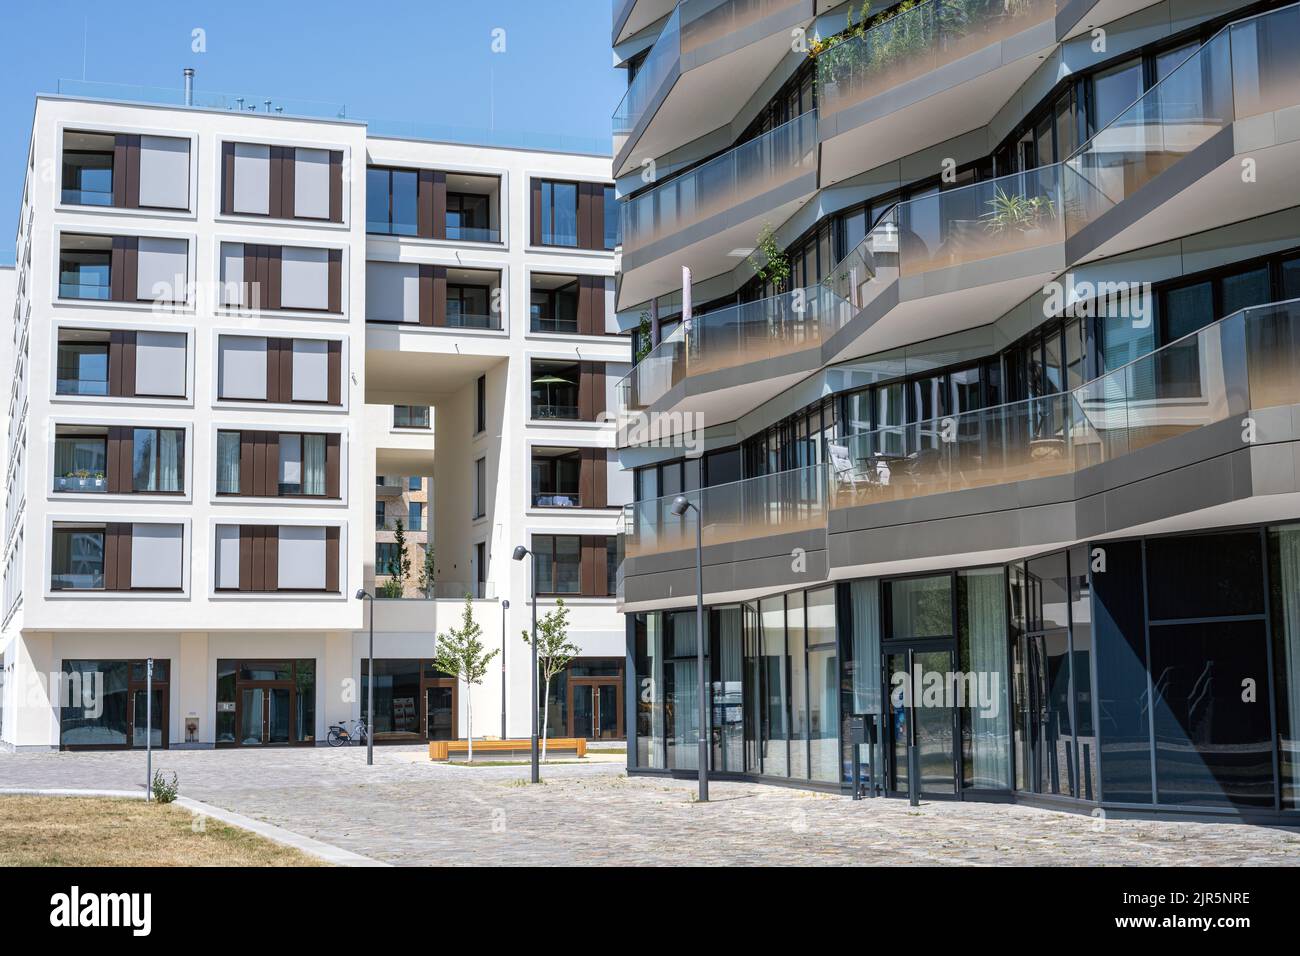 Modern apartment buildings in a housing development area in Berlin, Germany Stock Photo